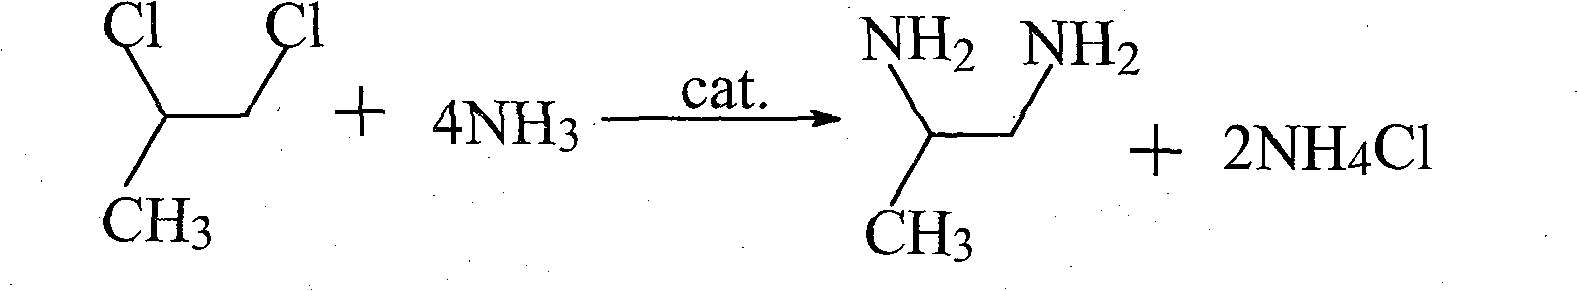 Supported catalyst for preparation of 1, 2-propane diamine